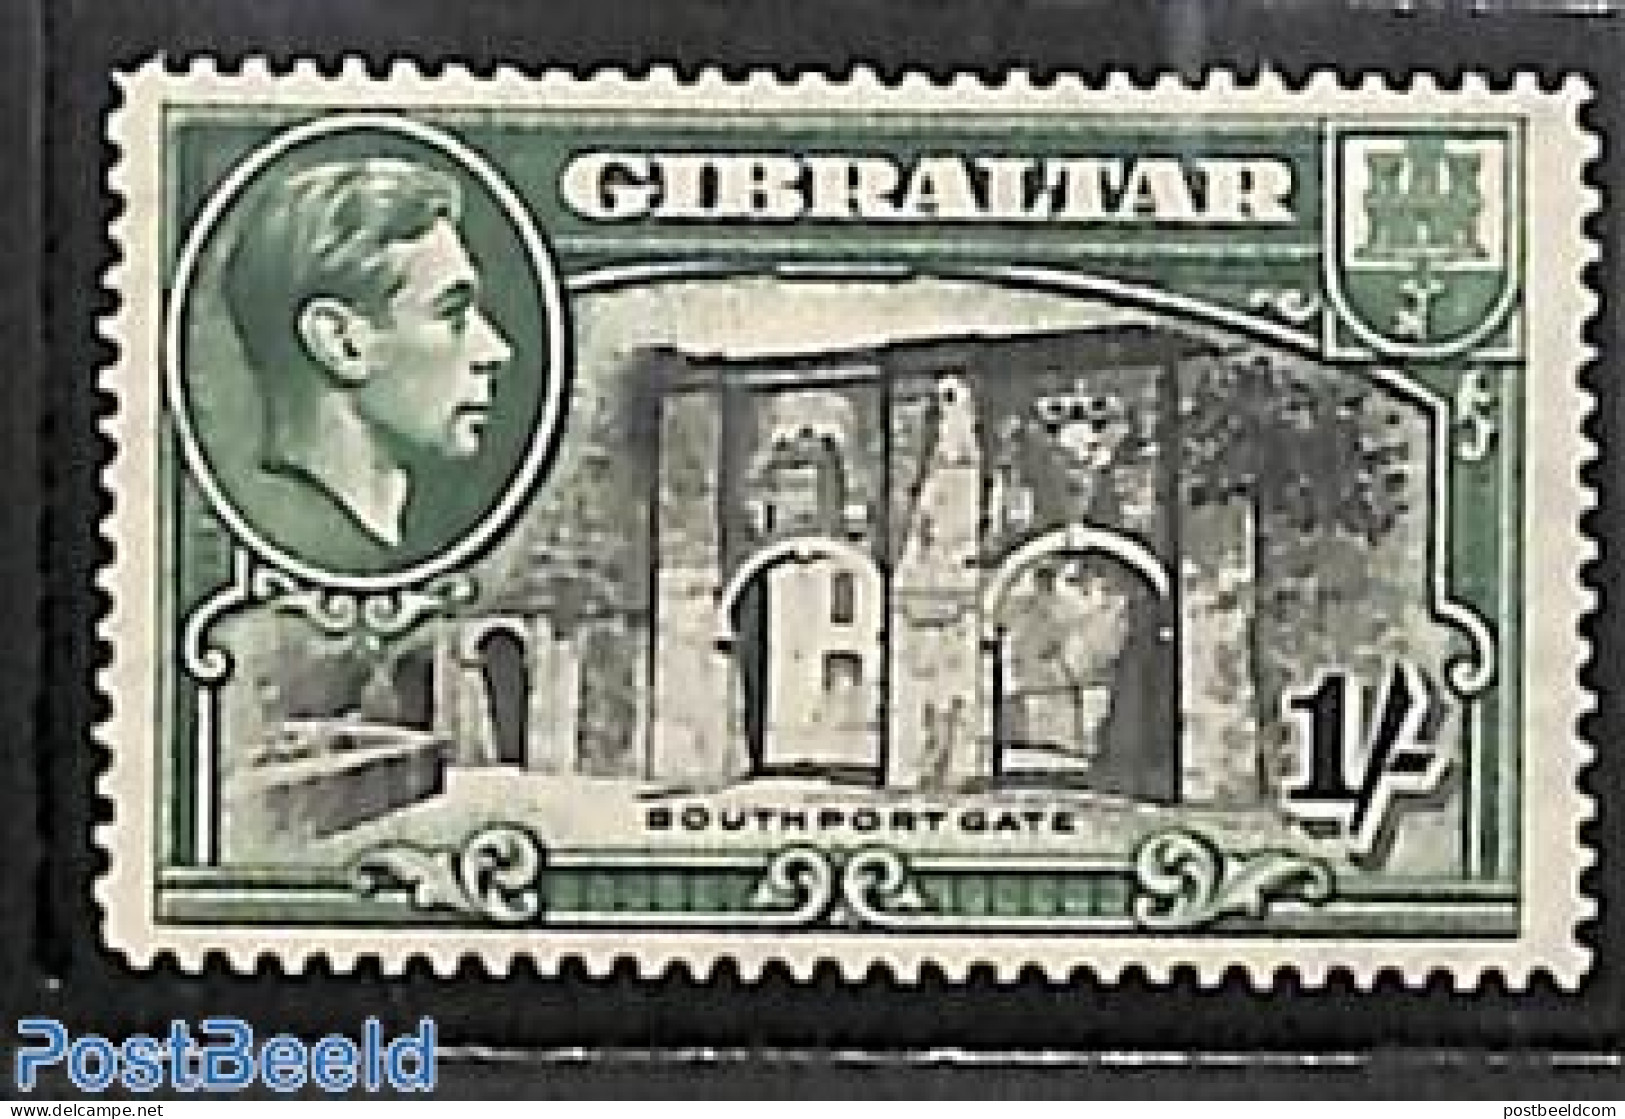 Gibraltar 1938 1Sh, Perf. 14, Stamp Out Of Set, Unused (hinged), Art - Architecture - Gibraltar